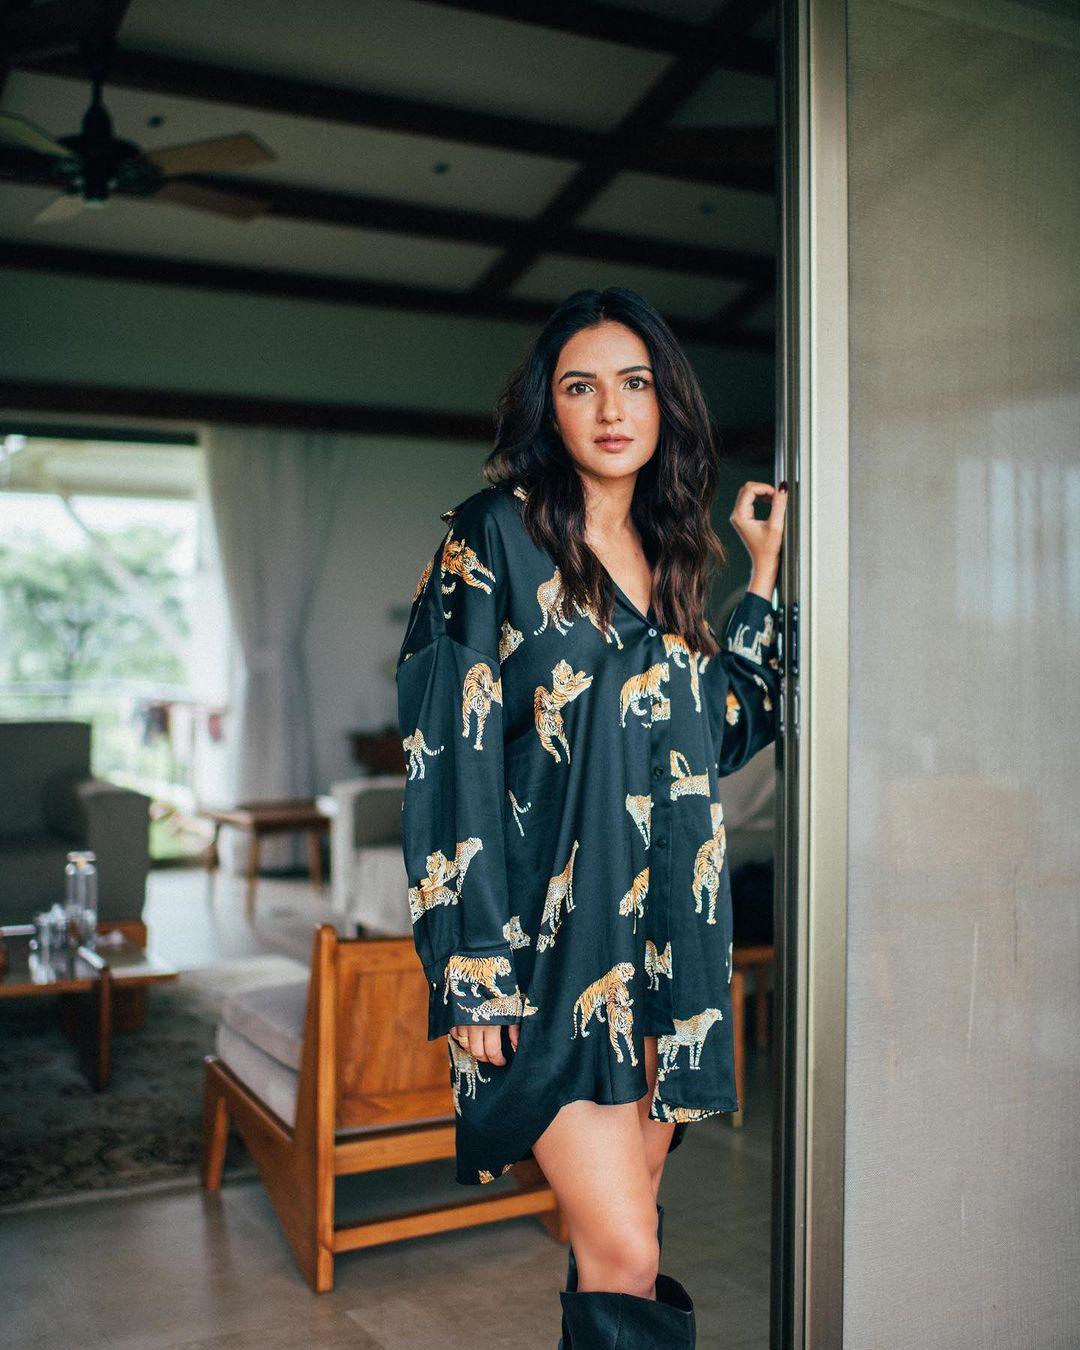  Jasmin Bhasin is a charming actress who rose to fame with her appearances in reality shows and television serials. She gained prominence for her participation in 'Bigg Boss' and her role in the show 'Dil Se Dil Tak'